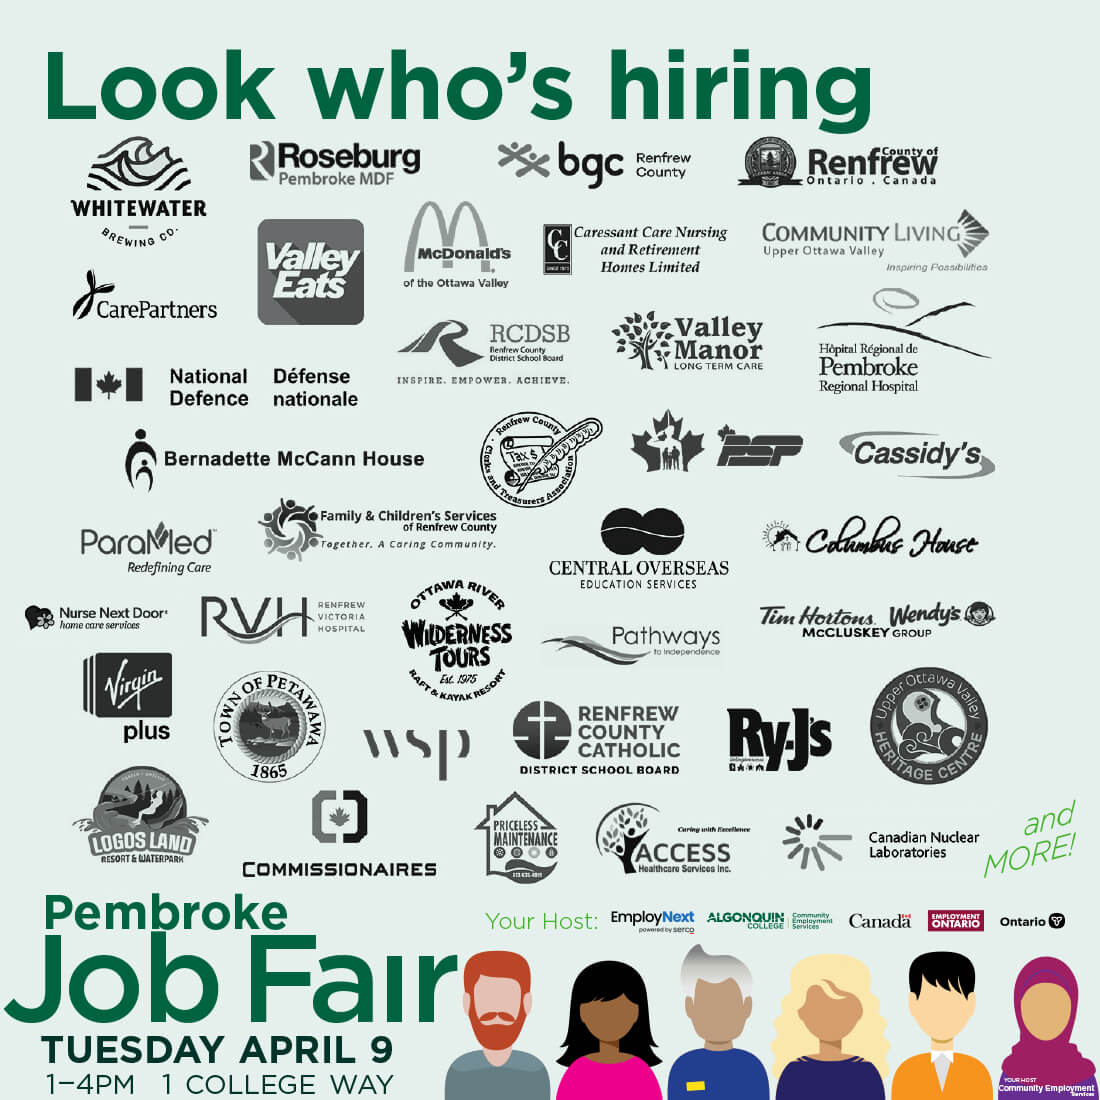 we can't wait to welcome these employers to campus April 9th as we host our Spring Job Fair. Plan to join us from 1:00 to 4:00 pm on campus. @AlgonquinPEM #OttawaValley #OttawaValleyEmployment